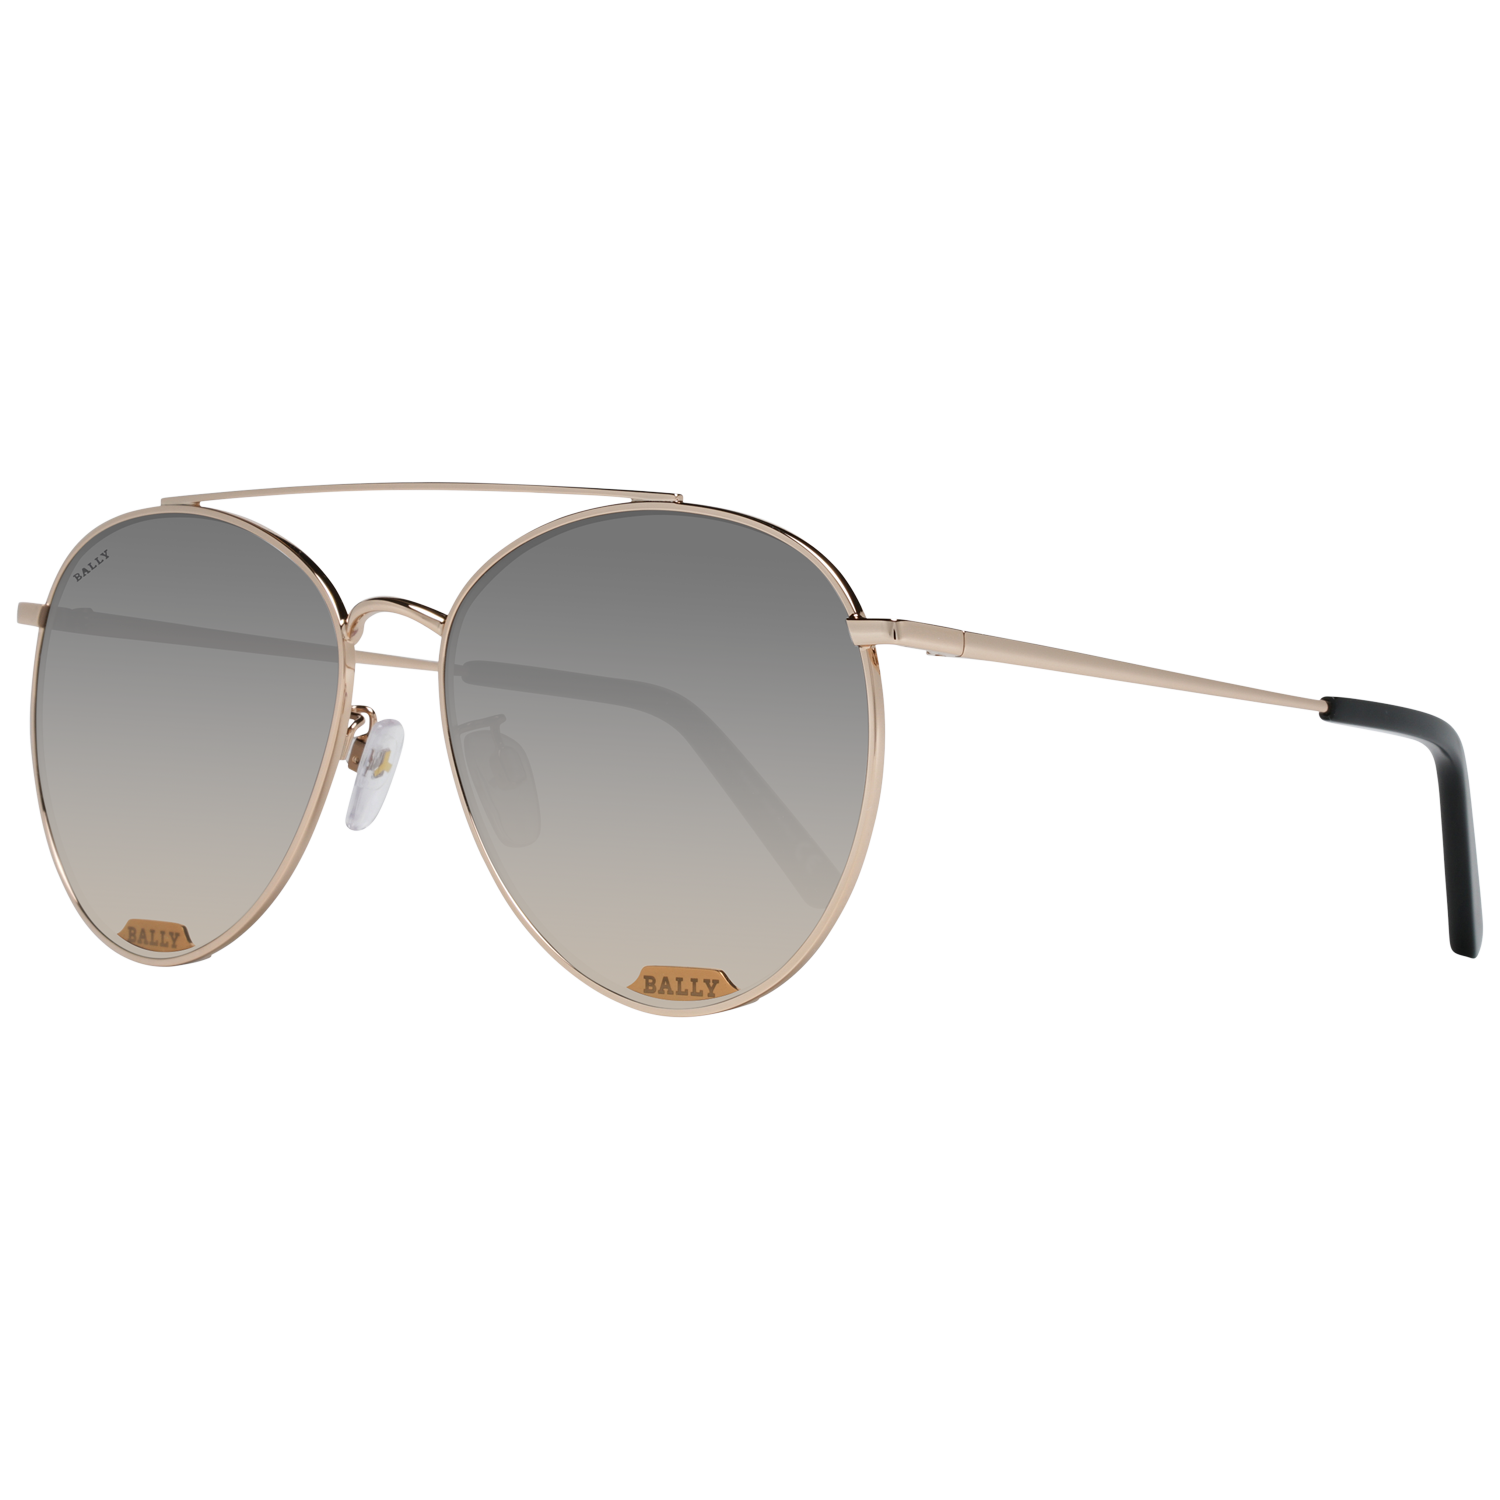 Bally Sunglasses BY0016-D 28B 60 Rose Gold